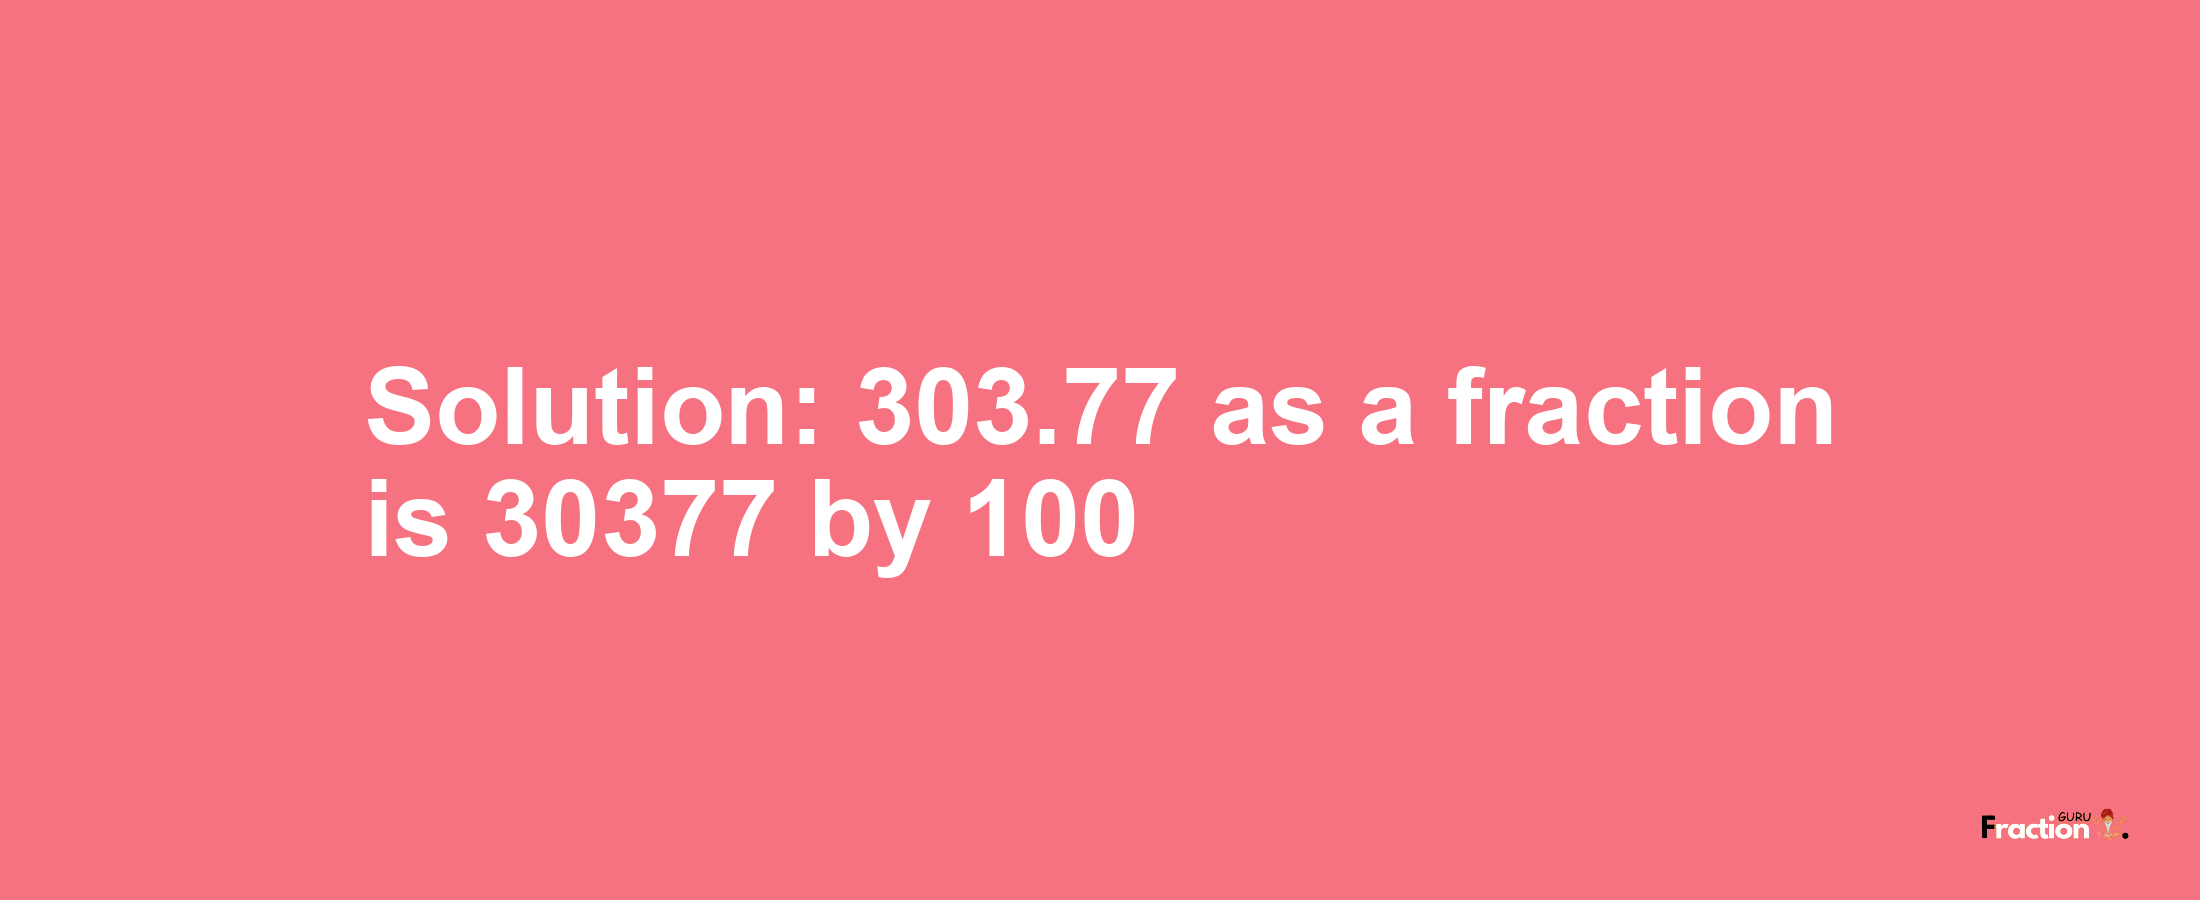 Solution:303.77 as a fraction is 30377/100